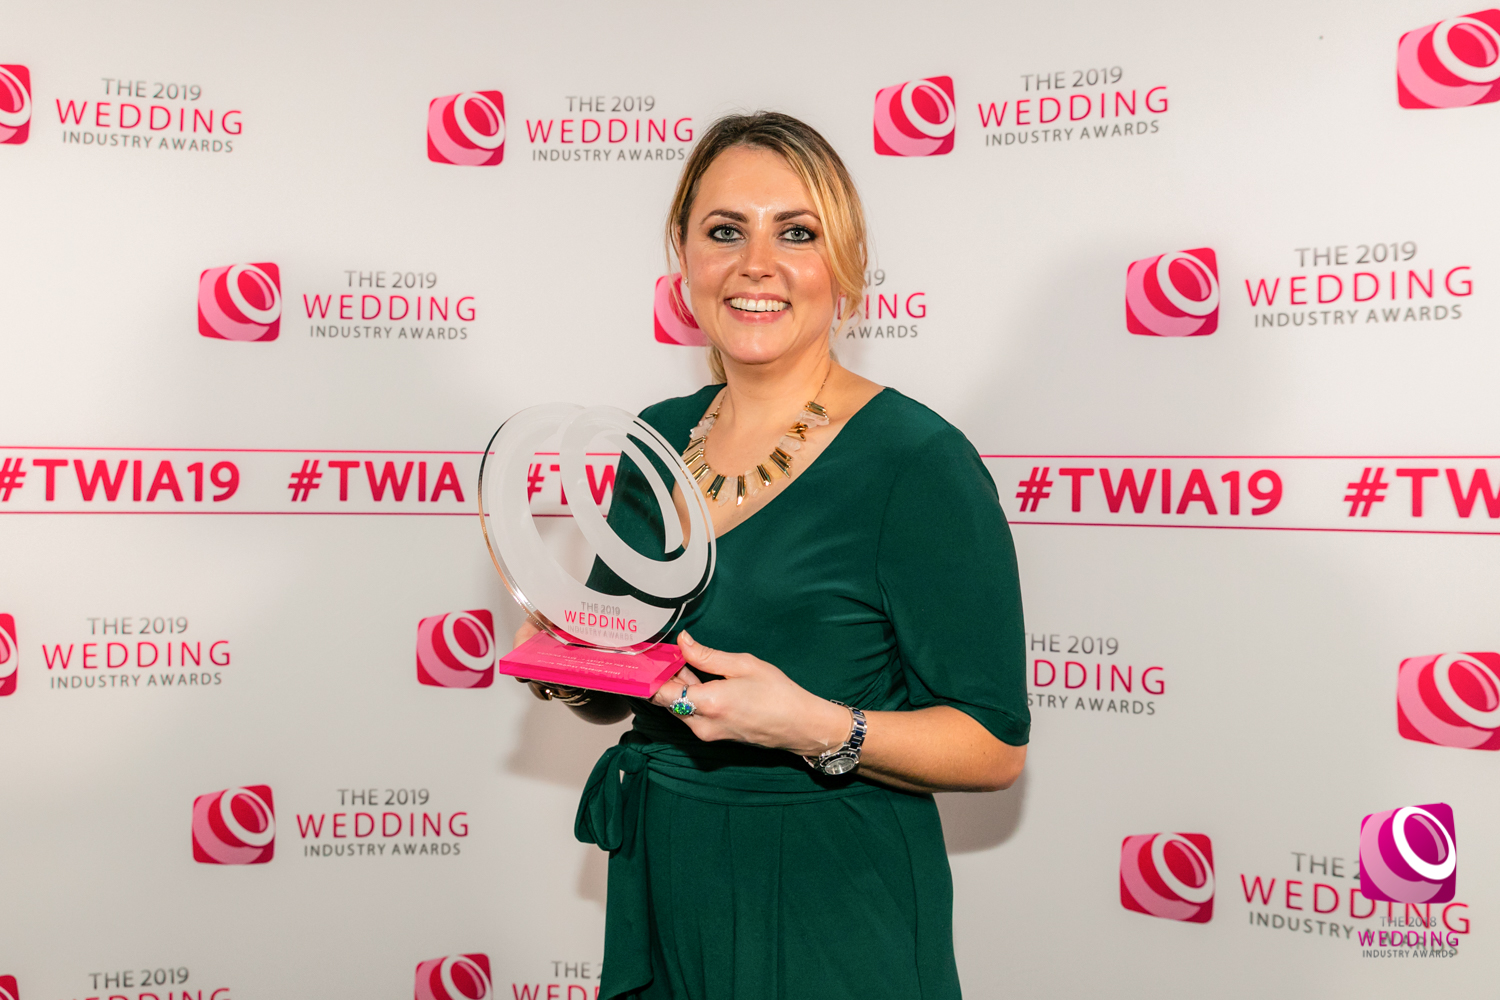 Last year, I applied for The Wedding Industry Awards (TWIA) due to one of my kind photographer friends, Kristida Photography nominating! Find out more on my blog.